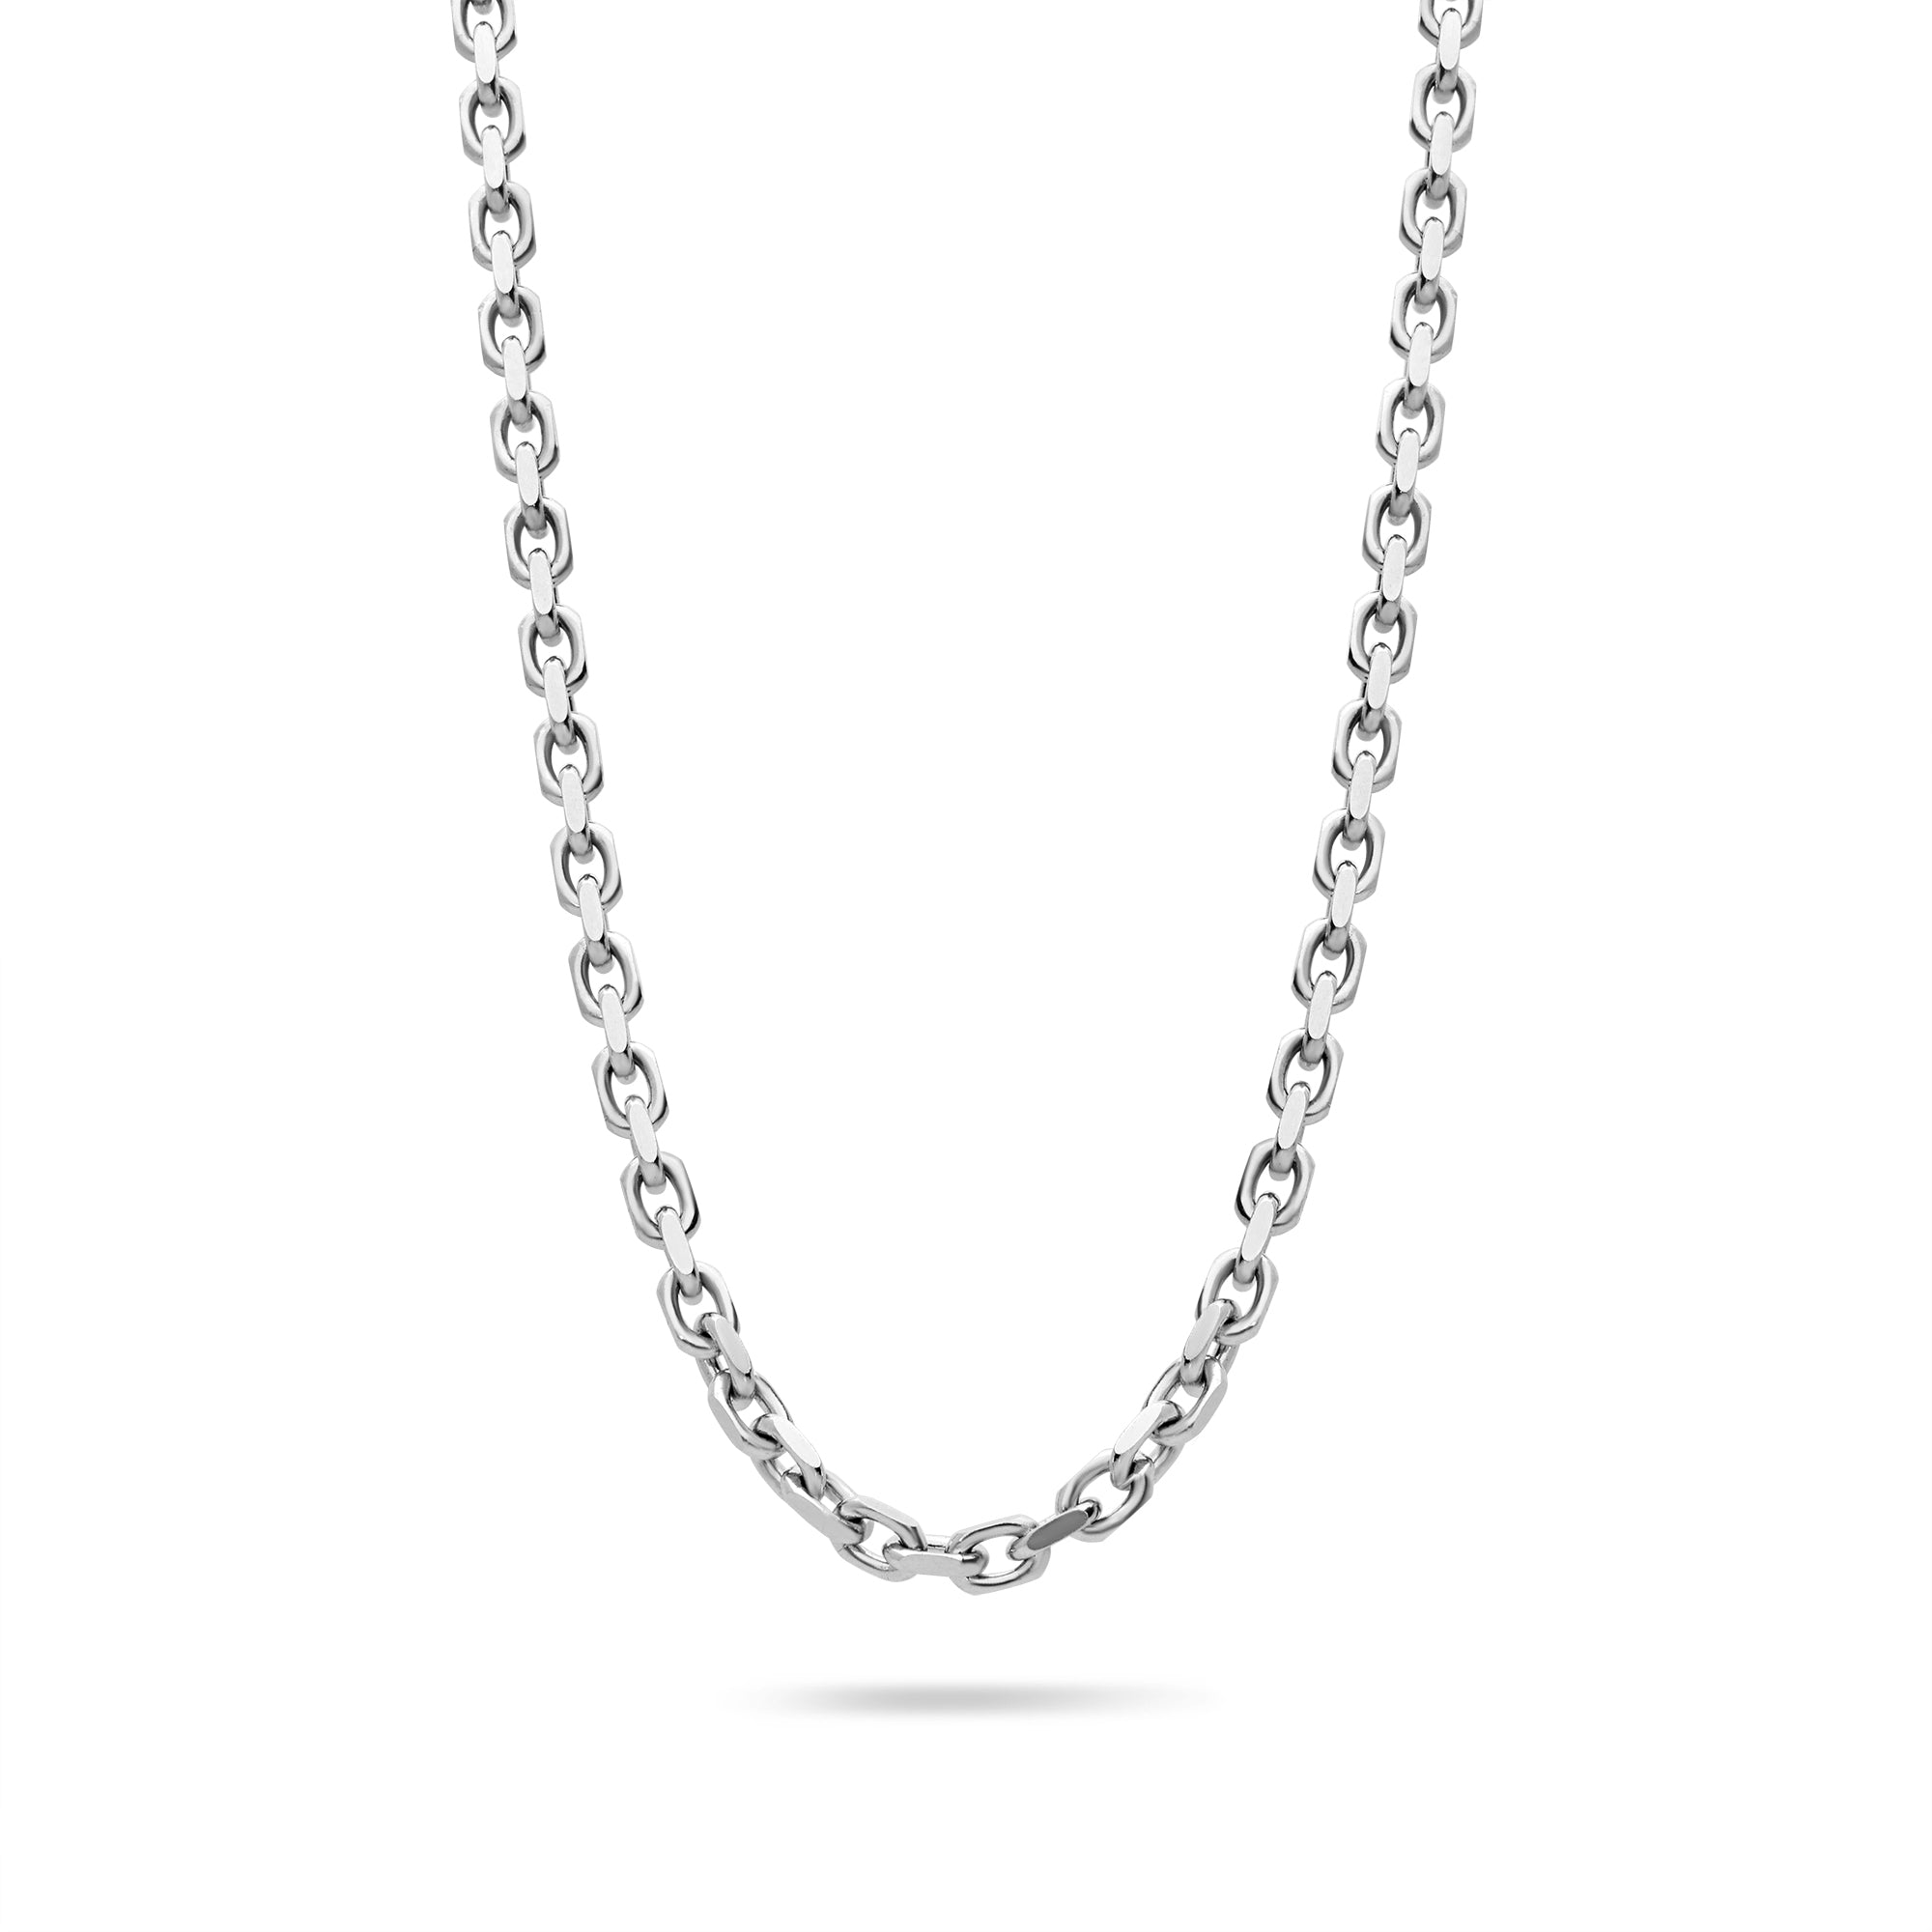 Gold Odin Link Chain (4mm) (14K WHITE GOLD) - IF & Co. Custom Jewelers